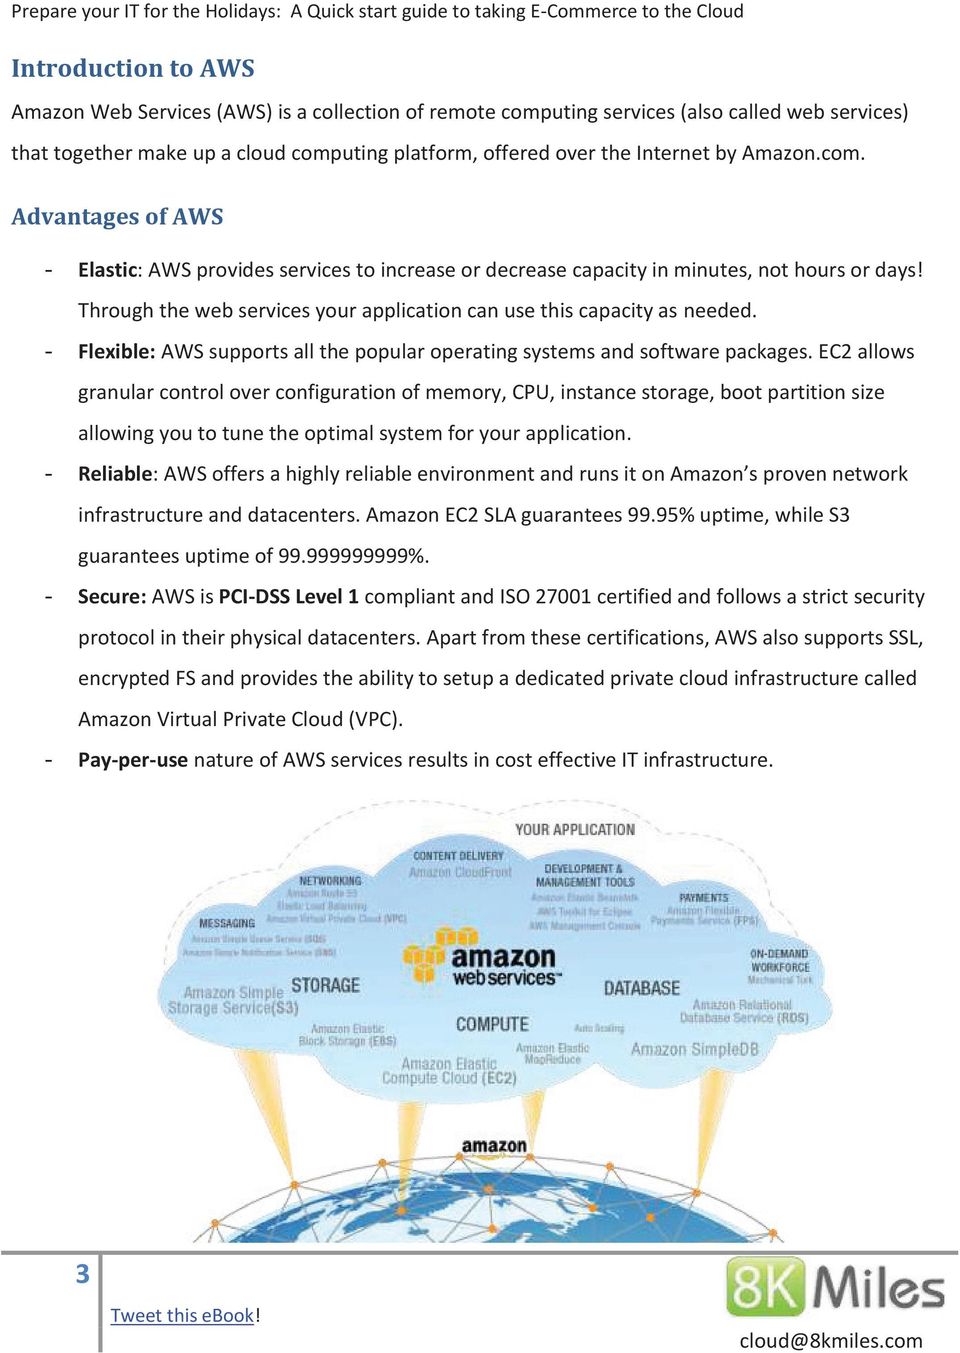 Through the web services your application can use this capacity as needed. - Flexible: AWS supports all the popular operating systems and software packages.